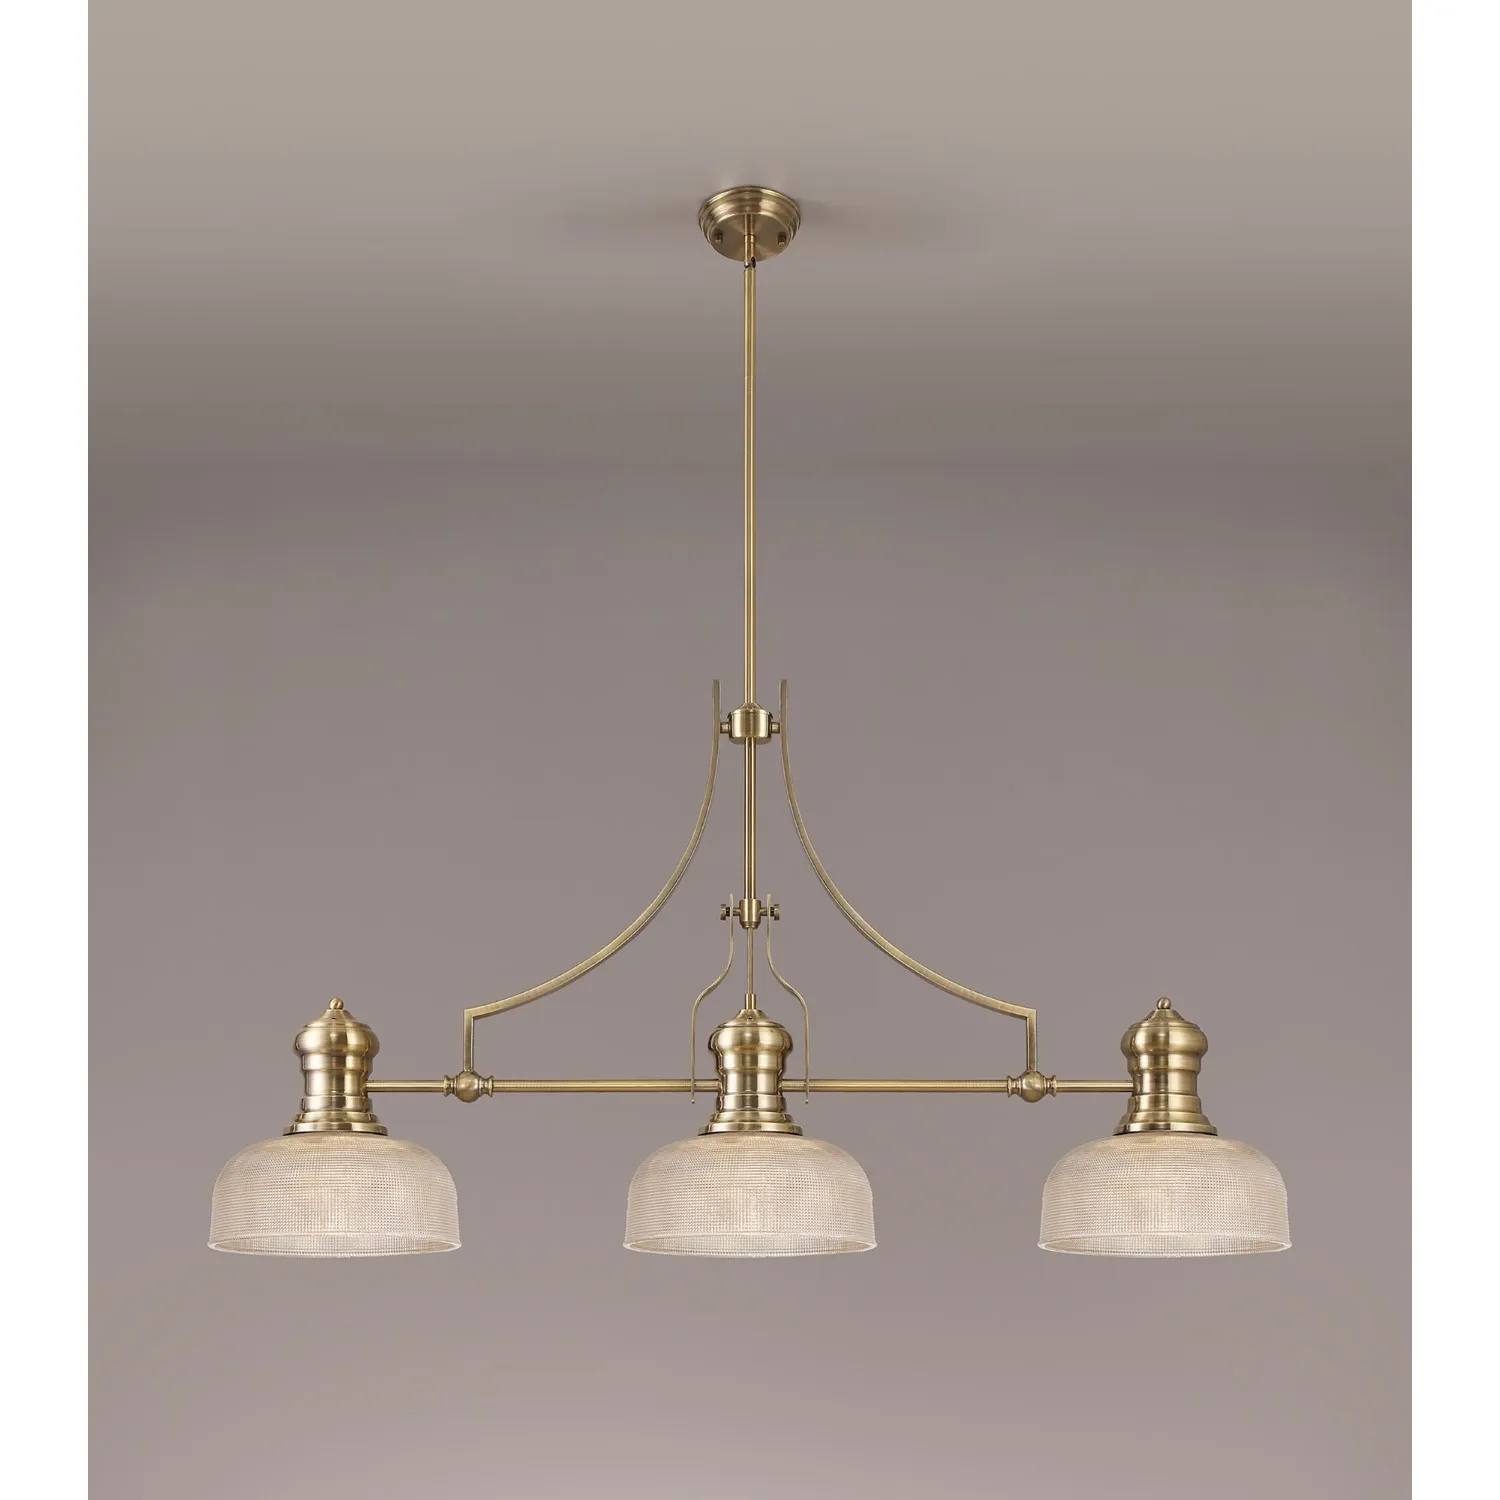 Sandy 3 Light Linear Pendant E27 With 26.5cm Prismatic Glass Shade, Antique Brass, Clear